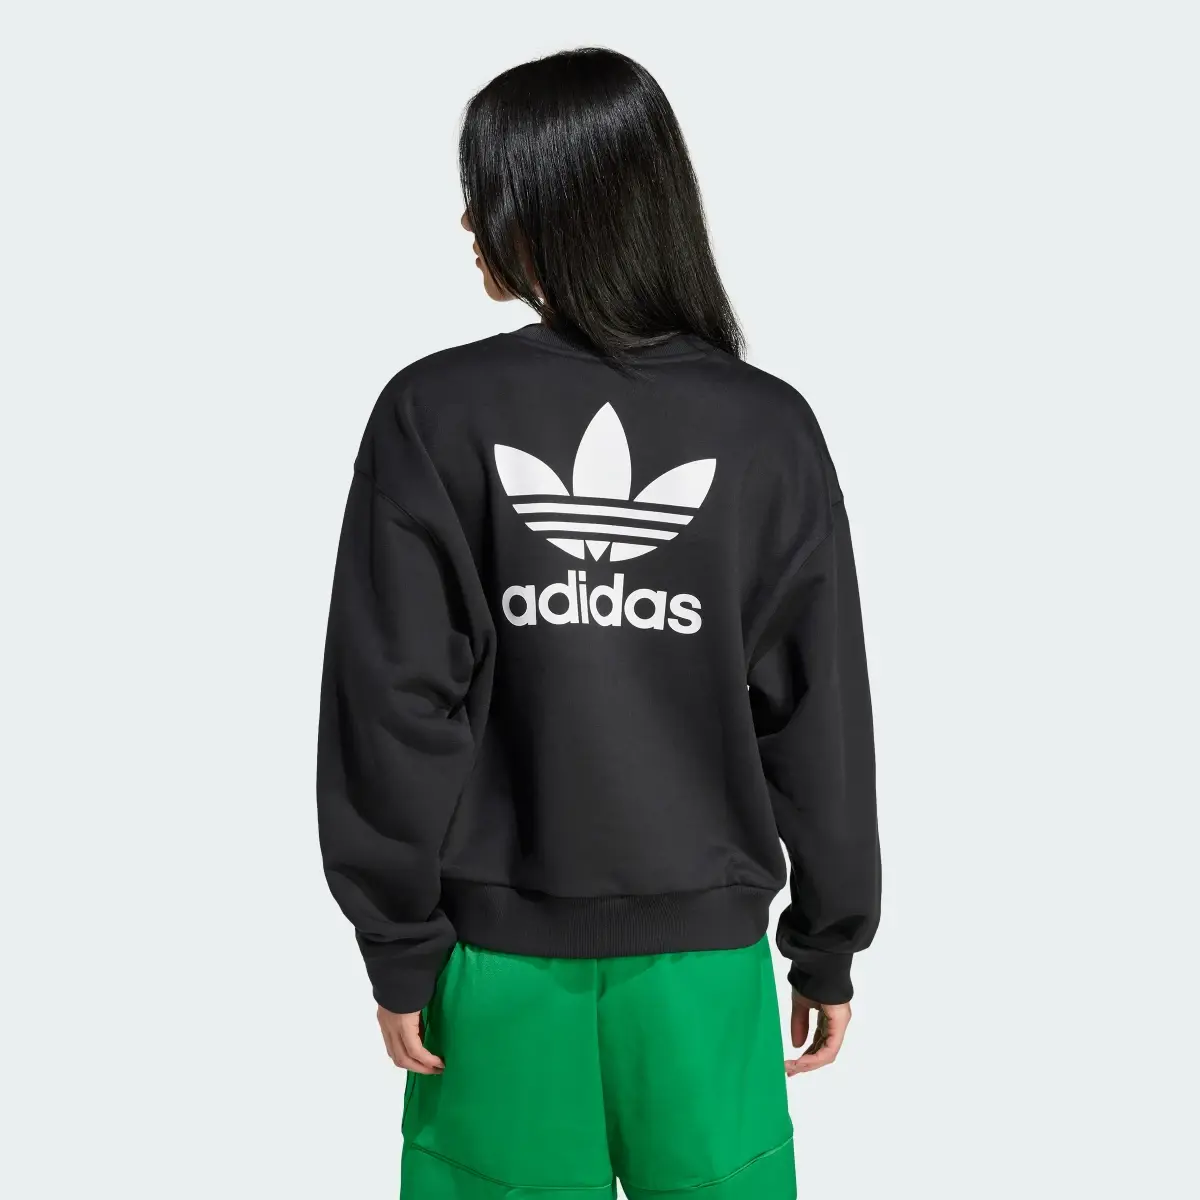 Adidas Trefoil Cropped Sweater. 3